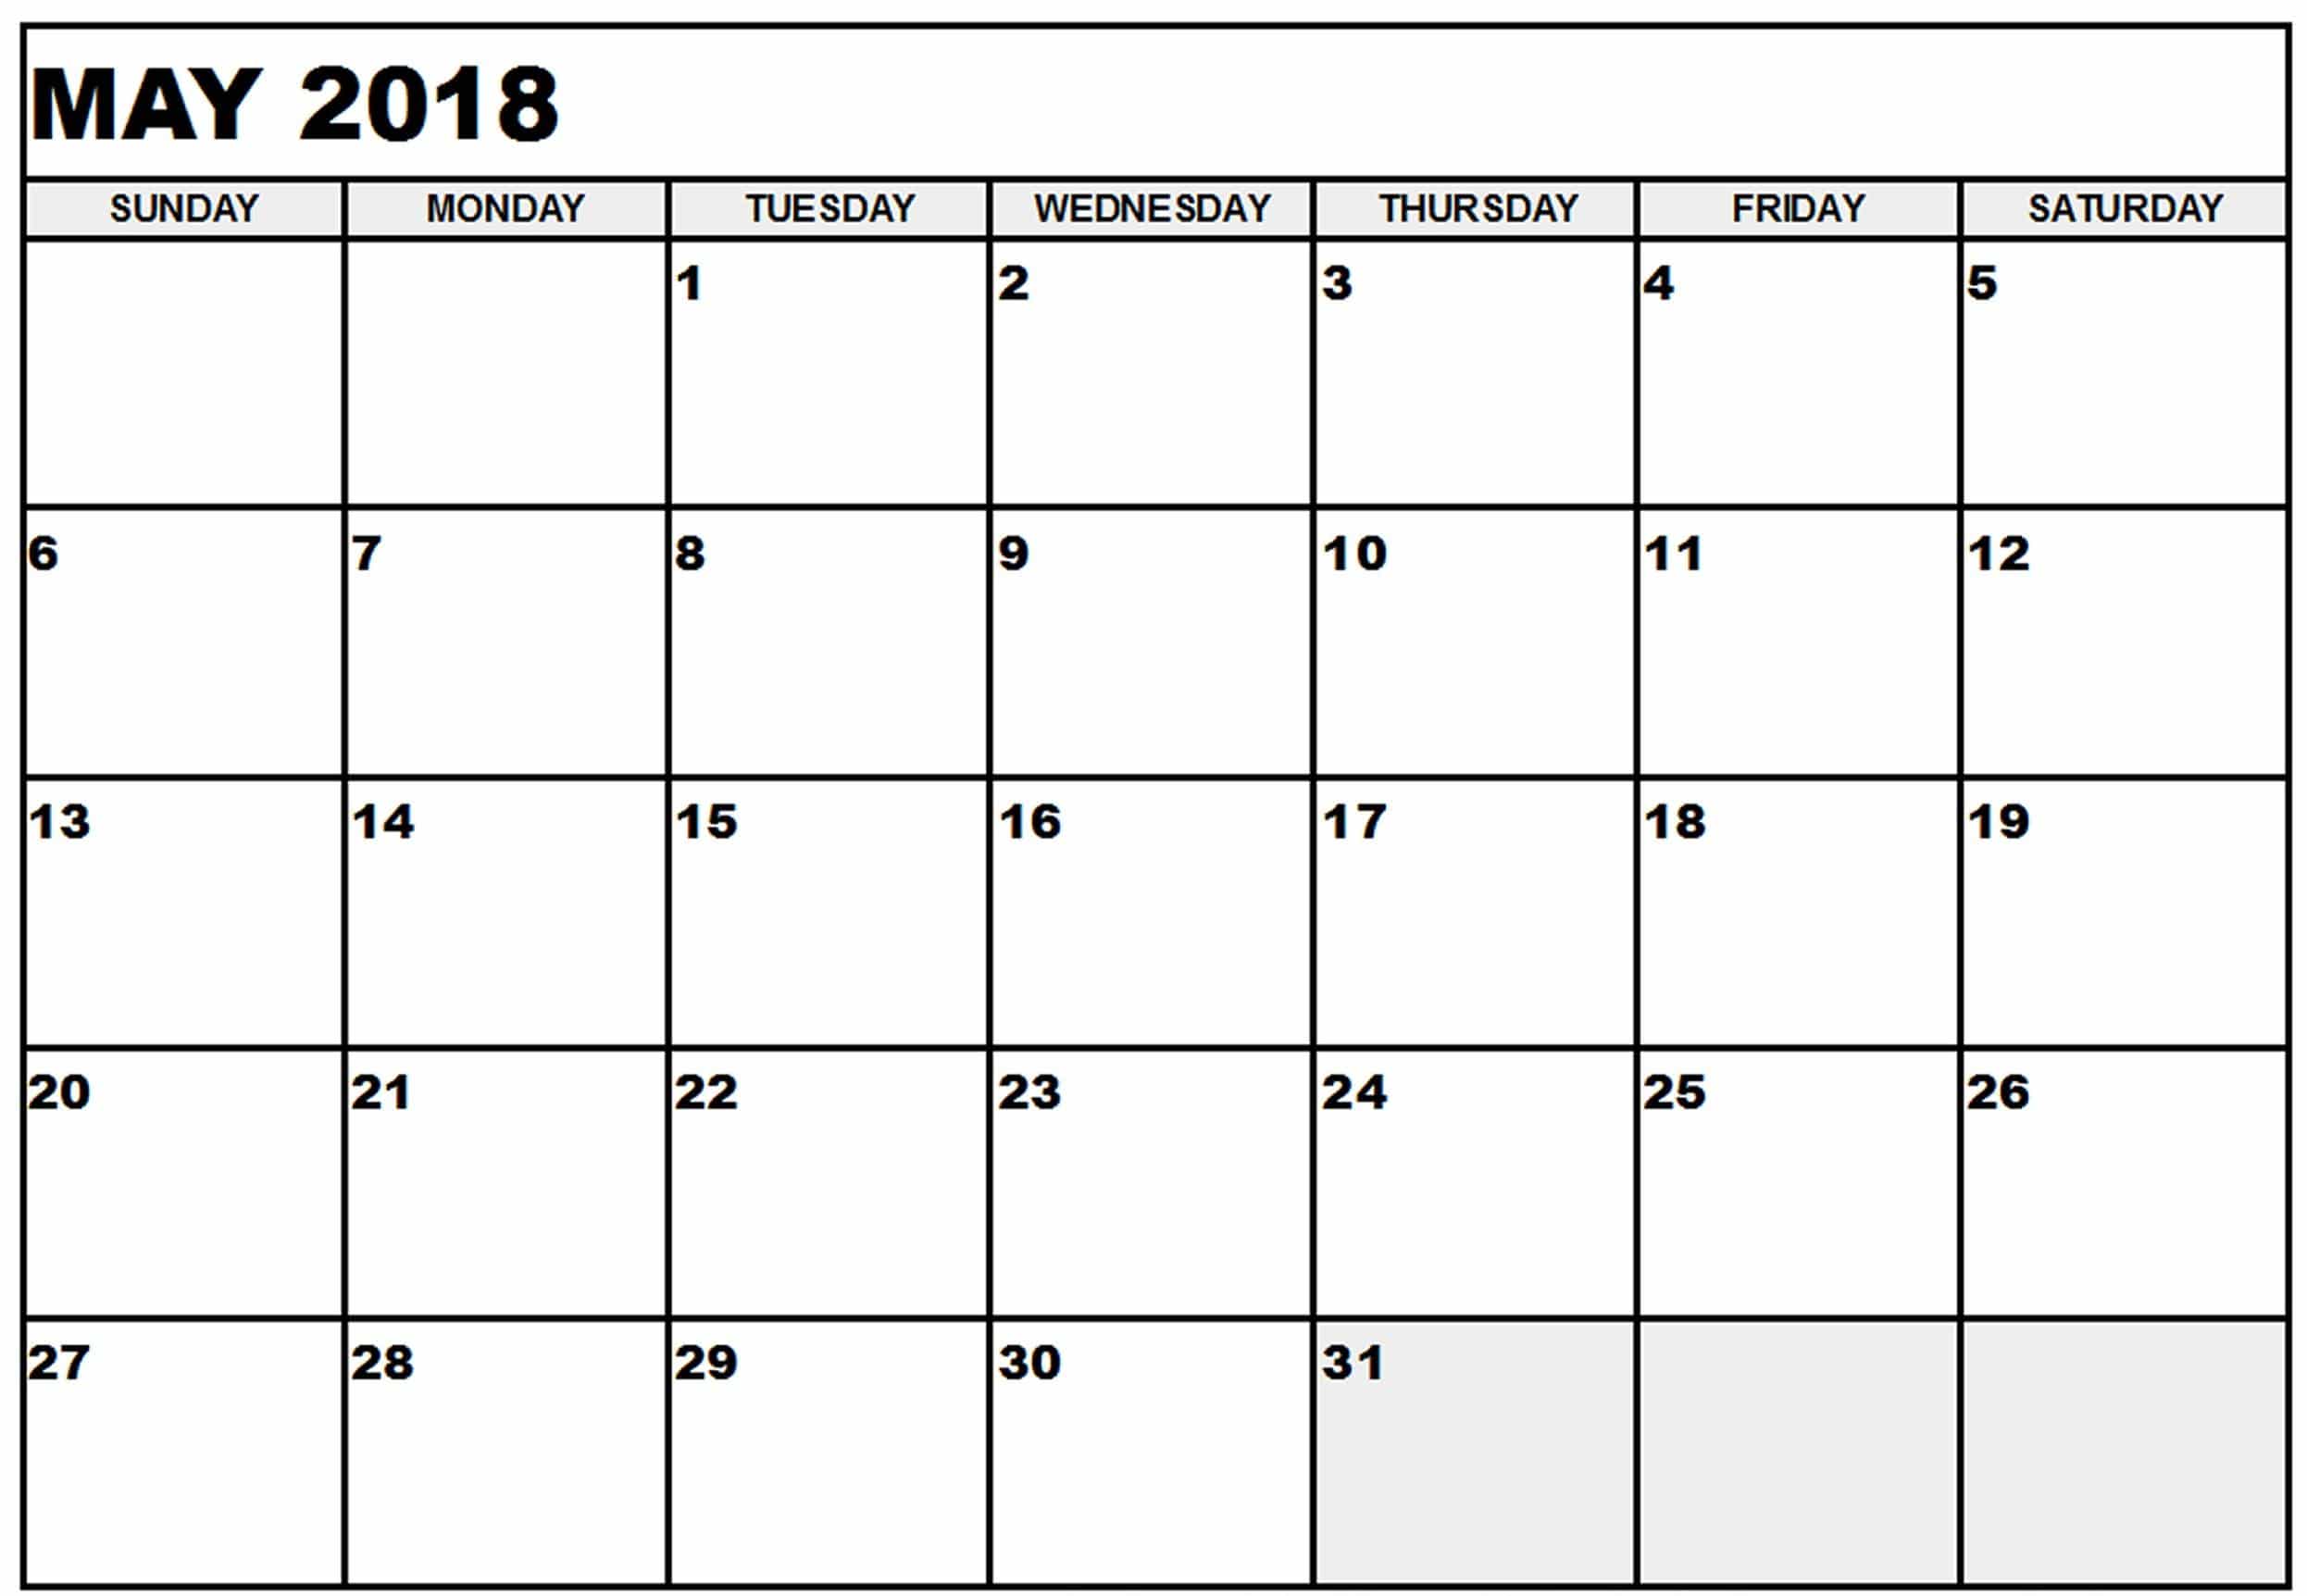 May 2018 Monthly Calendars